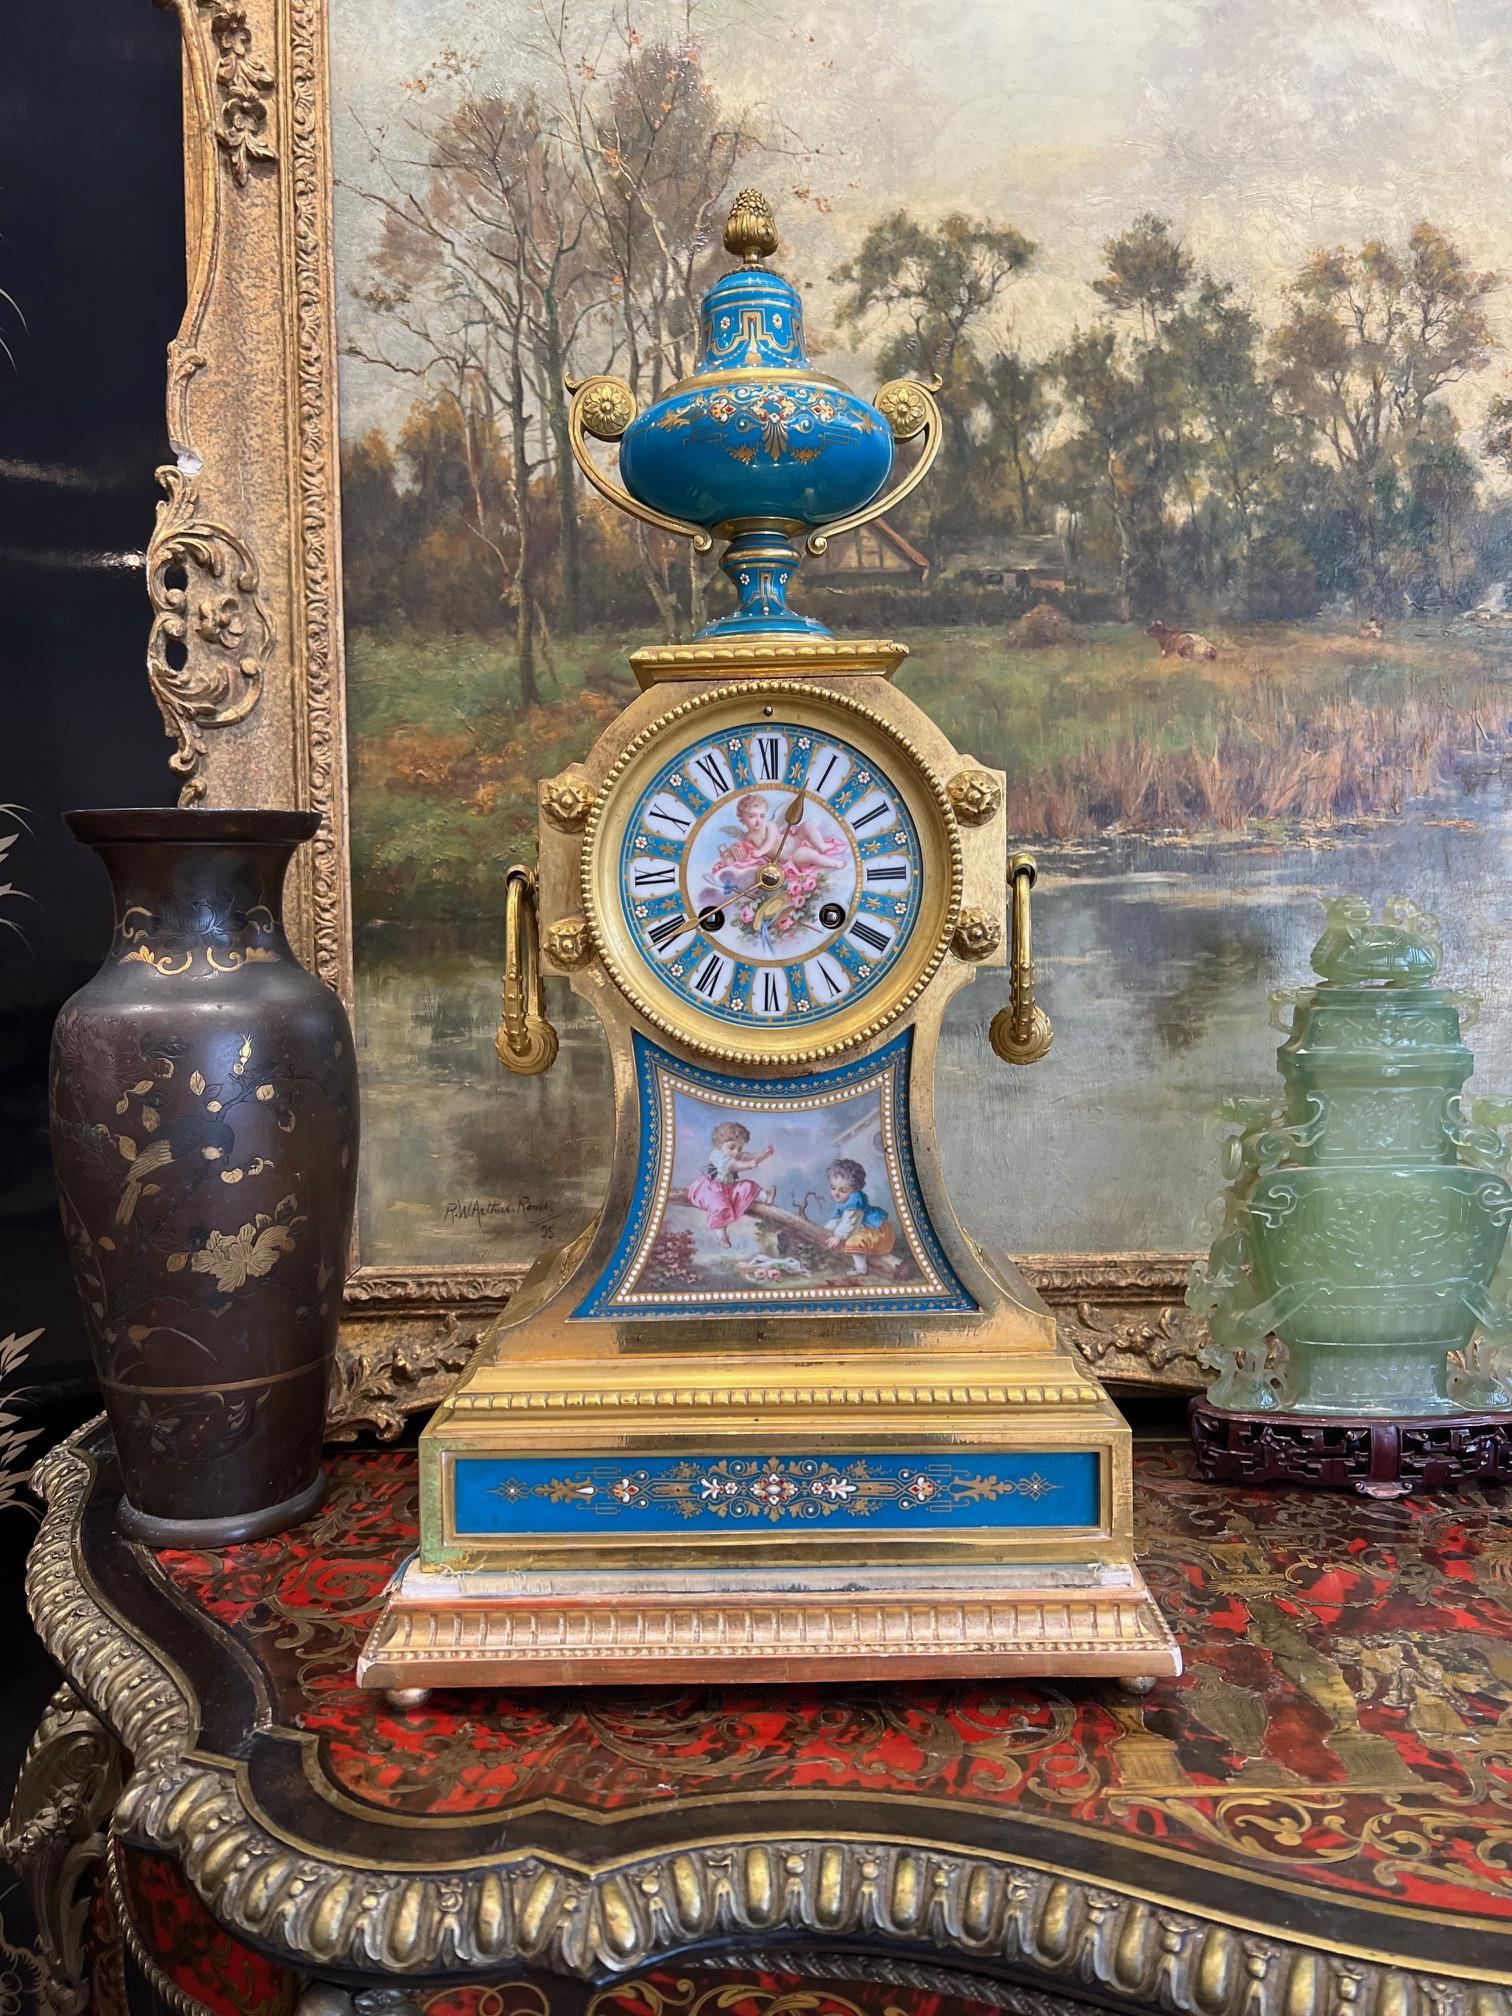 A FINE 19TH CENTURY PORCELAIN MANTEL CLOCK REPUTEDLY OWNED BY EMPRESS EUGENIE, WIFE OF NAPOLEON III - Image 2 of 8